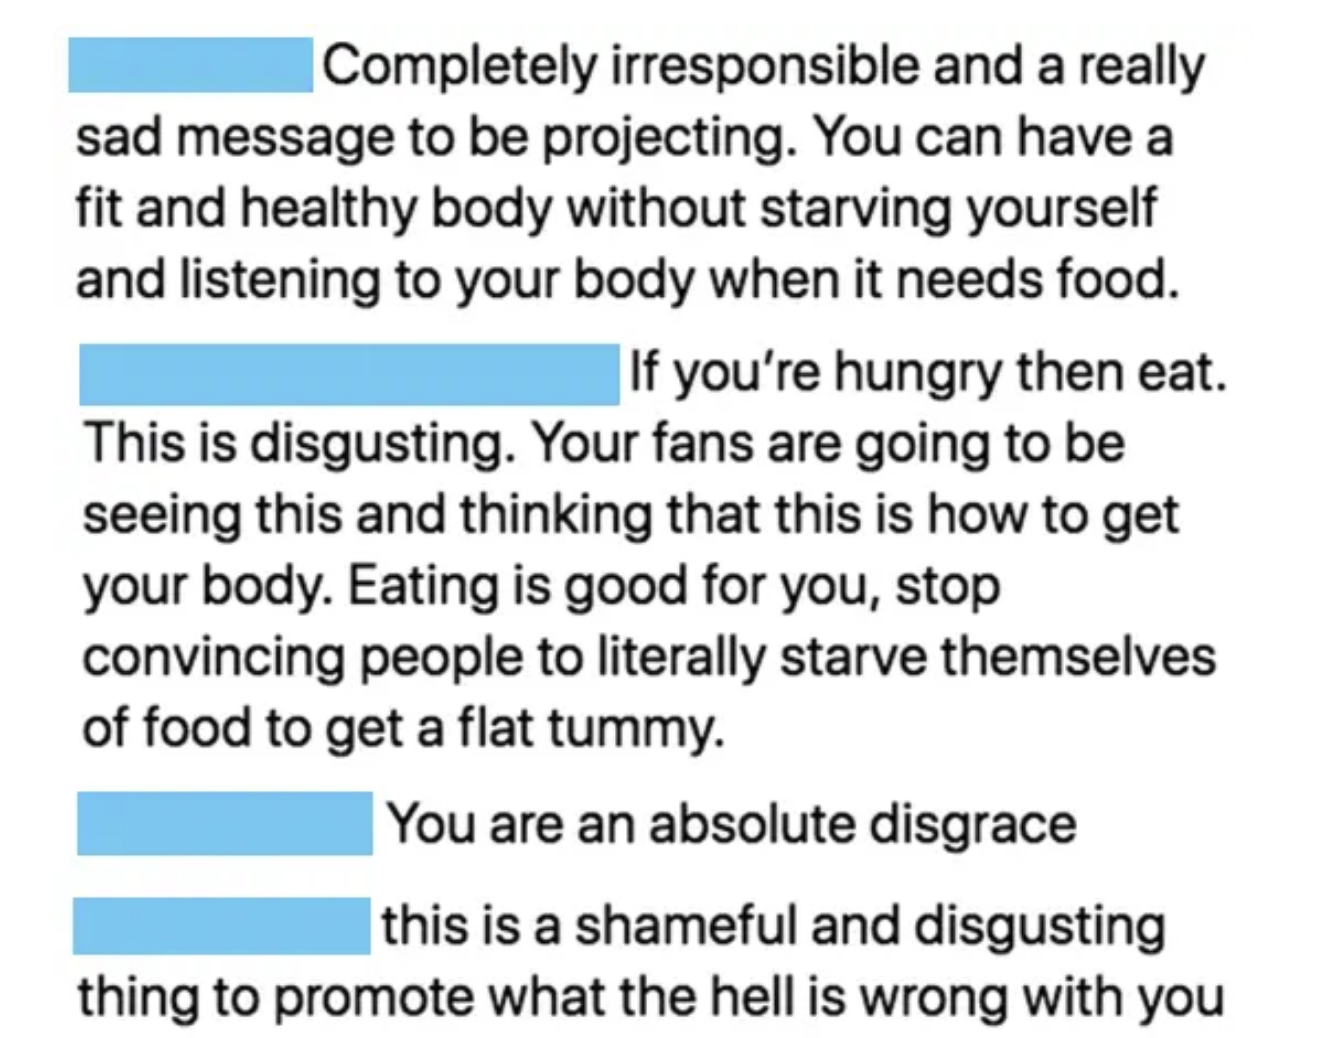 comments left on the photo criticizing someone for promoting a negative body image by starving themselves with a diet lollipop